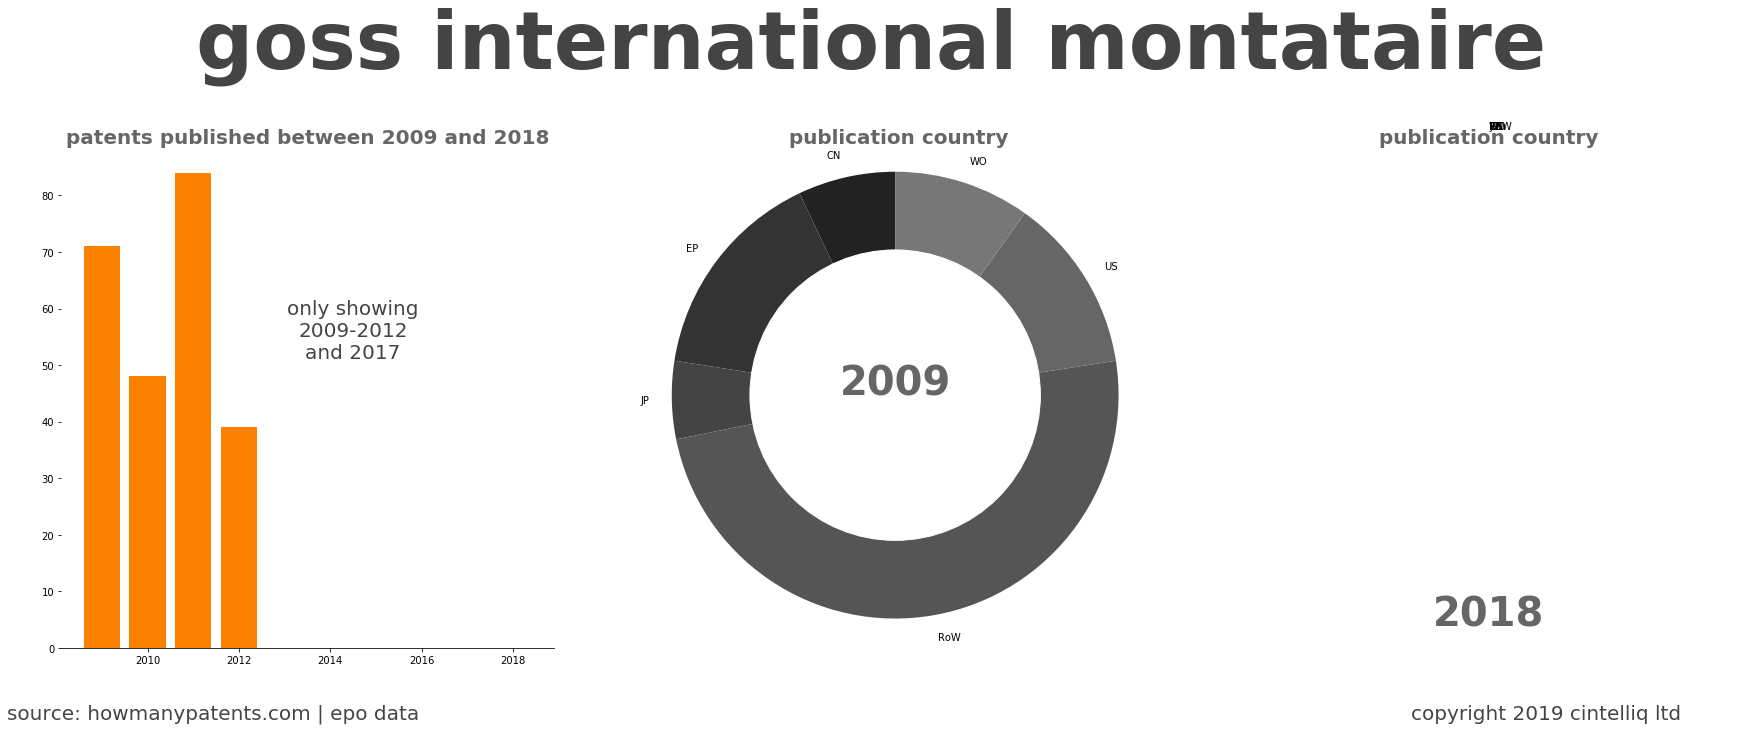 summary of patents for Goss International Montataire